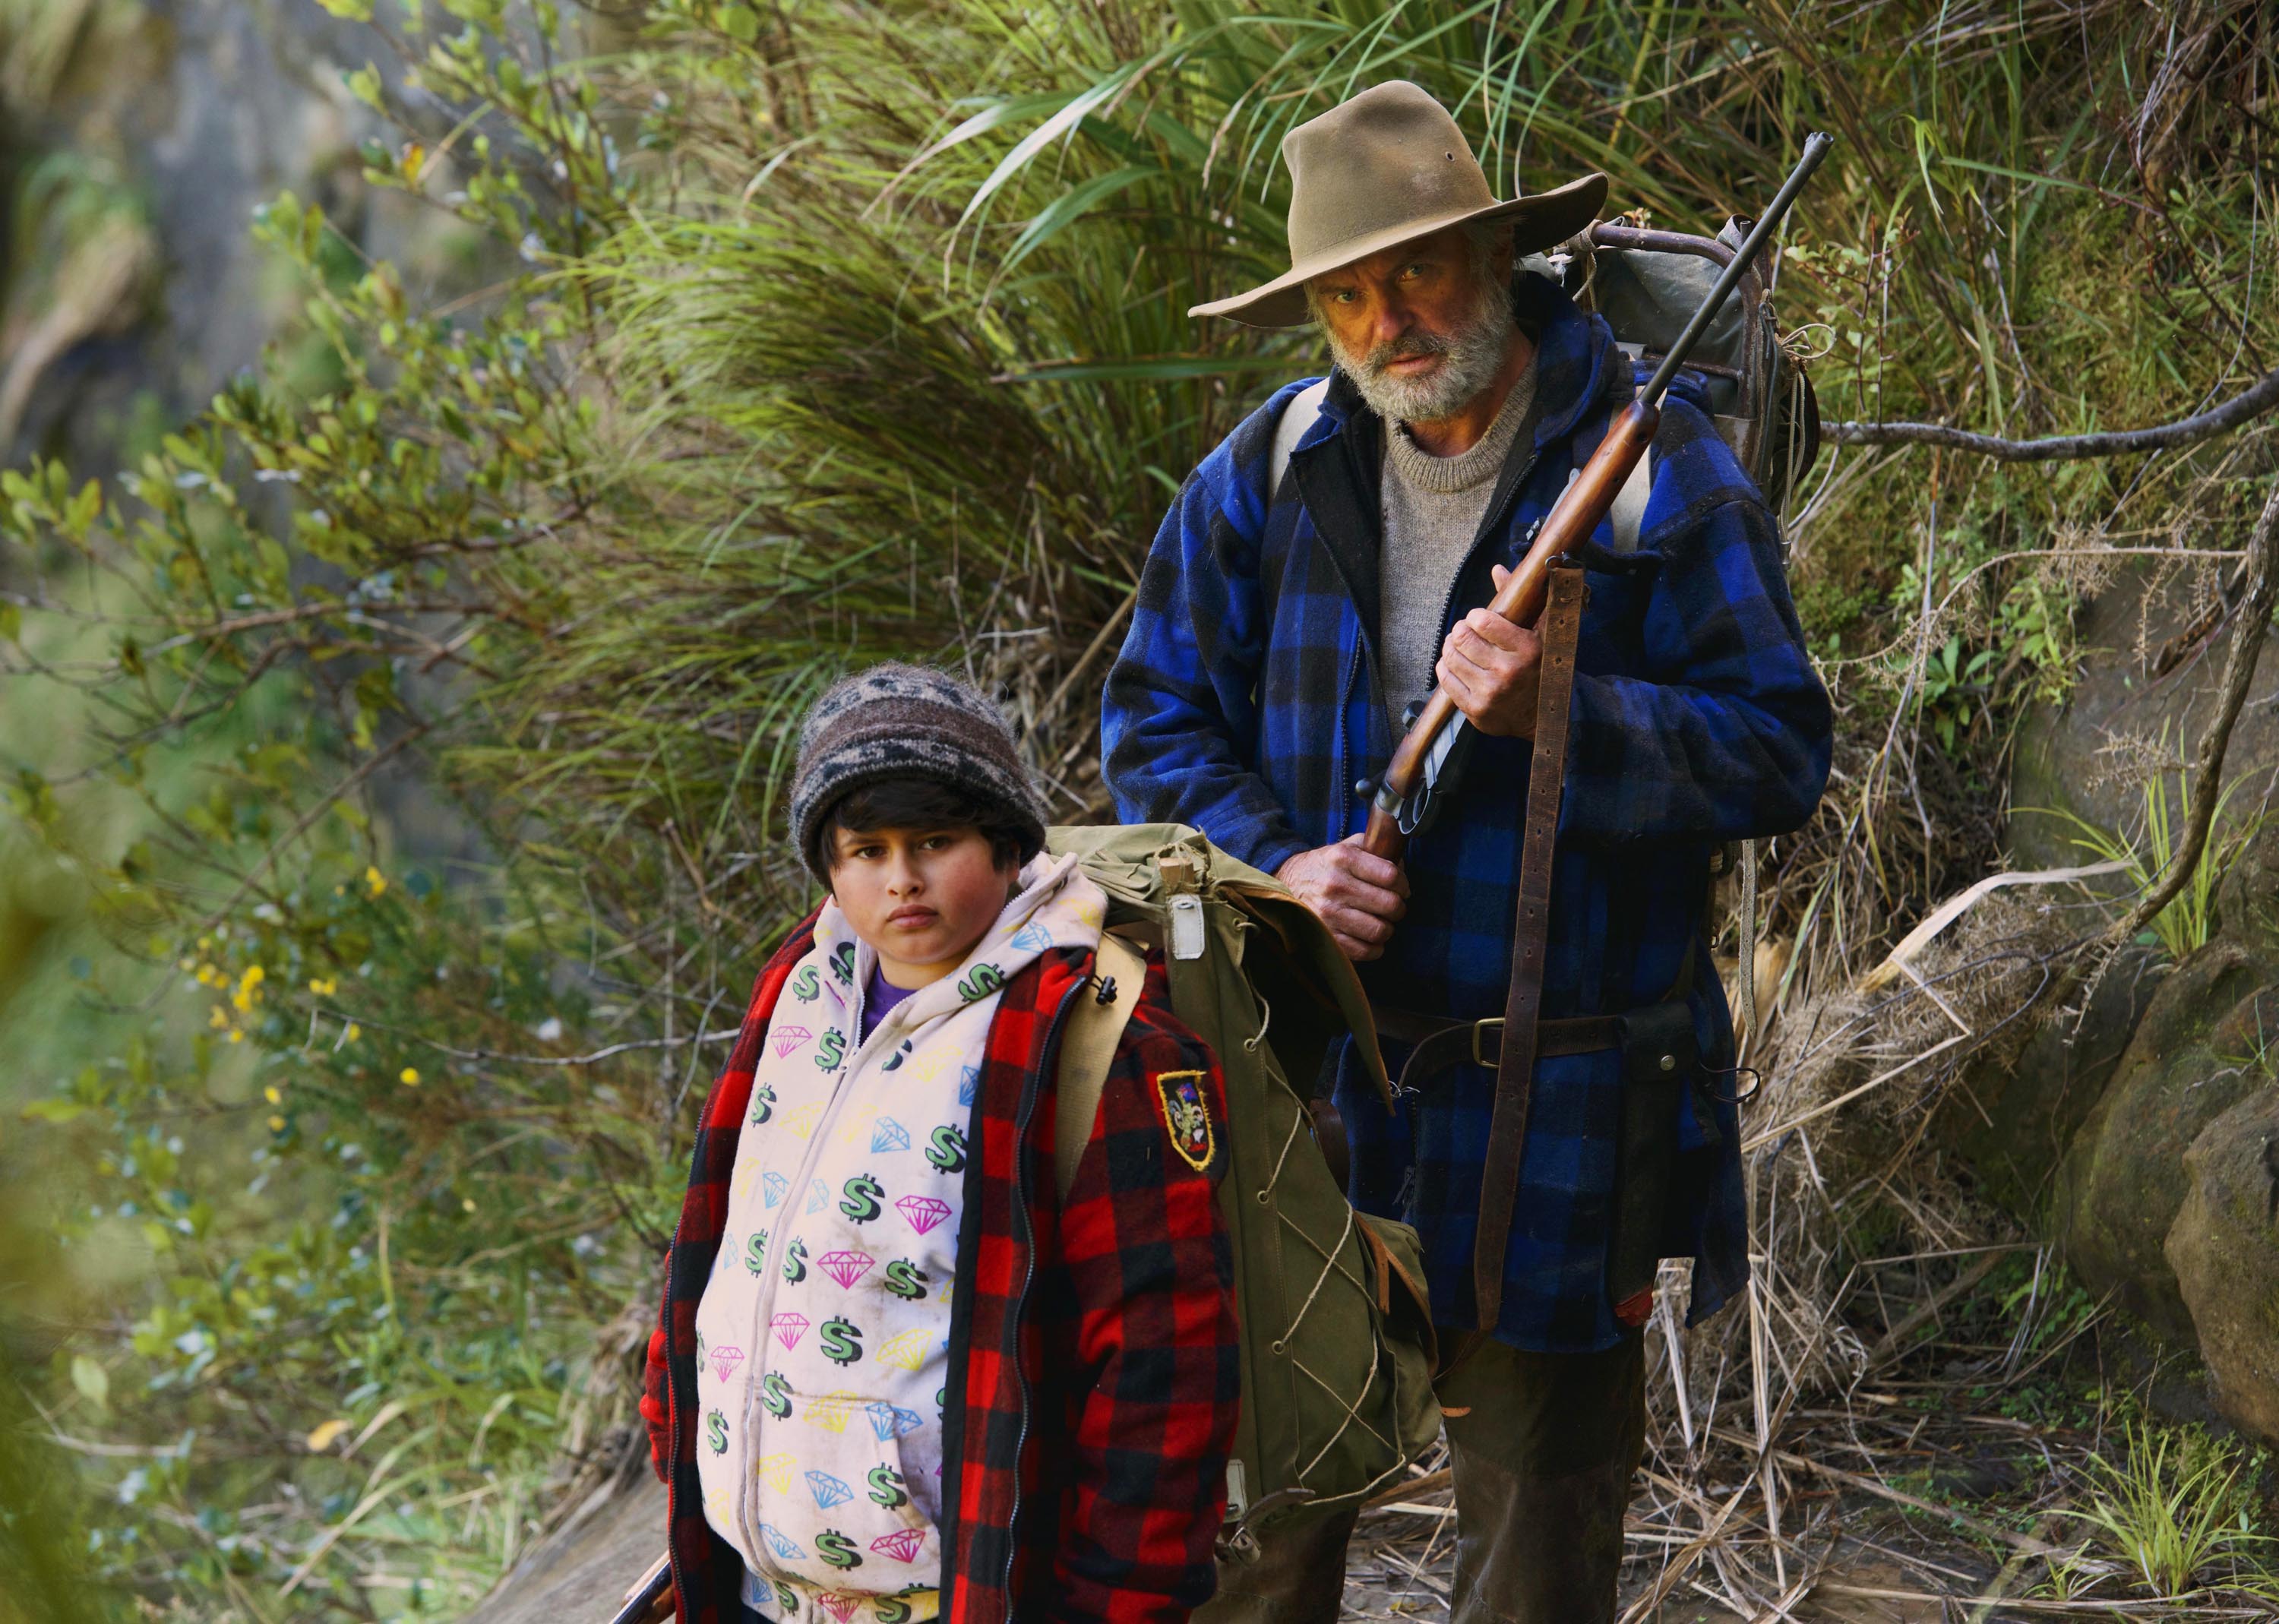 The Hunt for the Wilderpeople